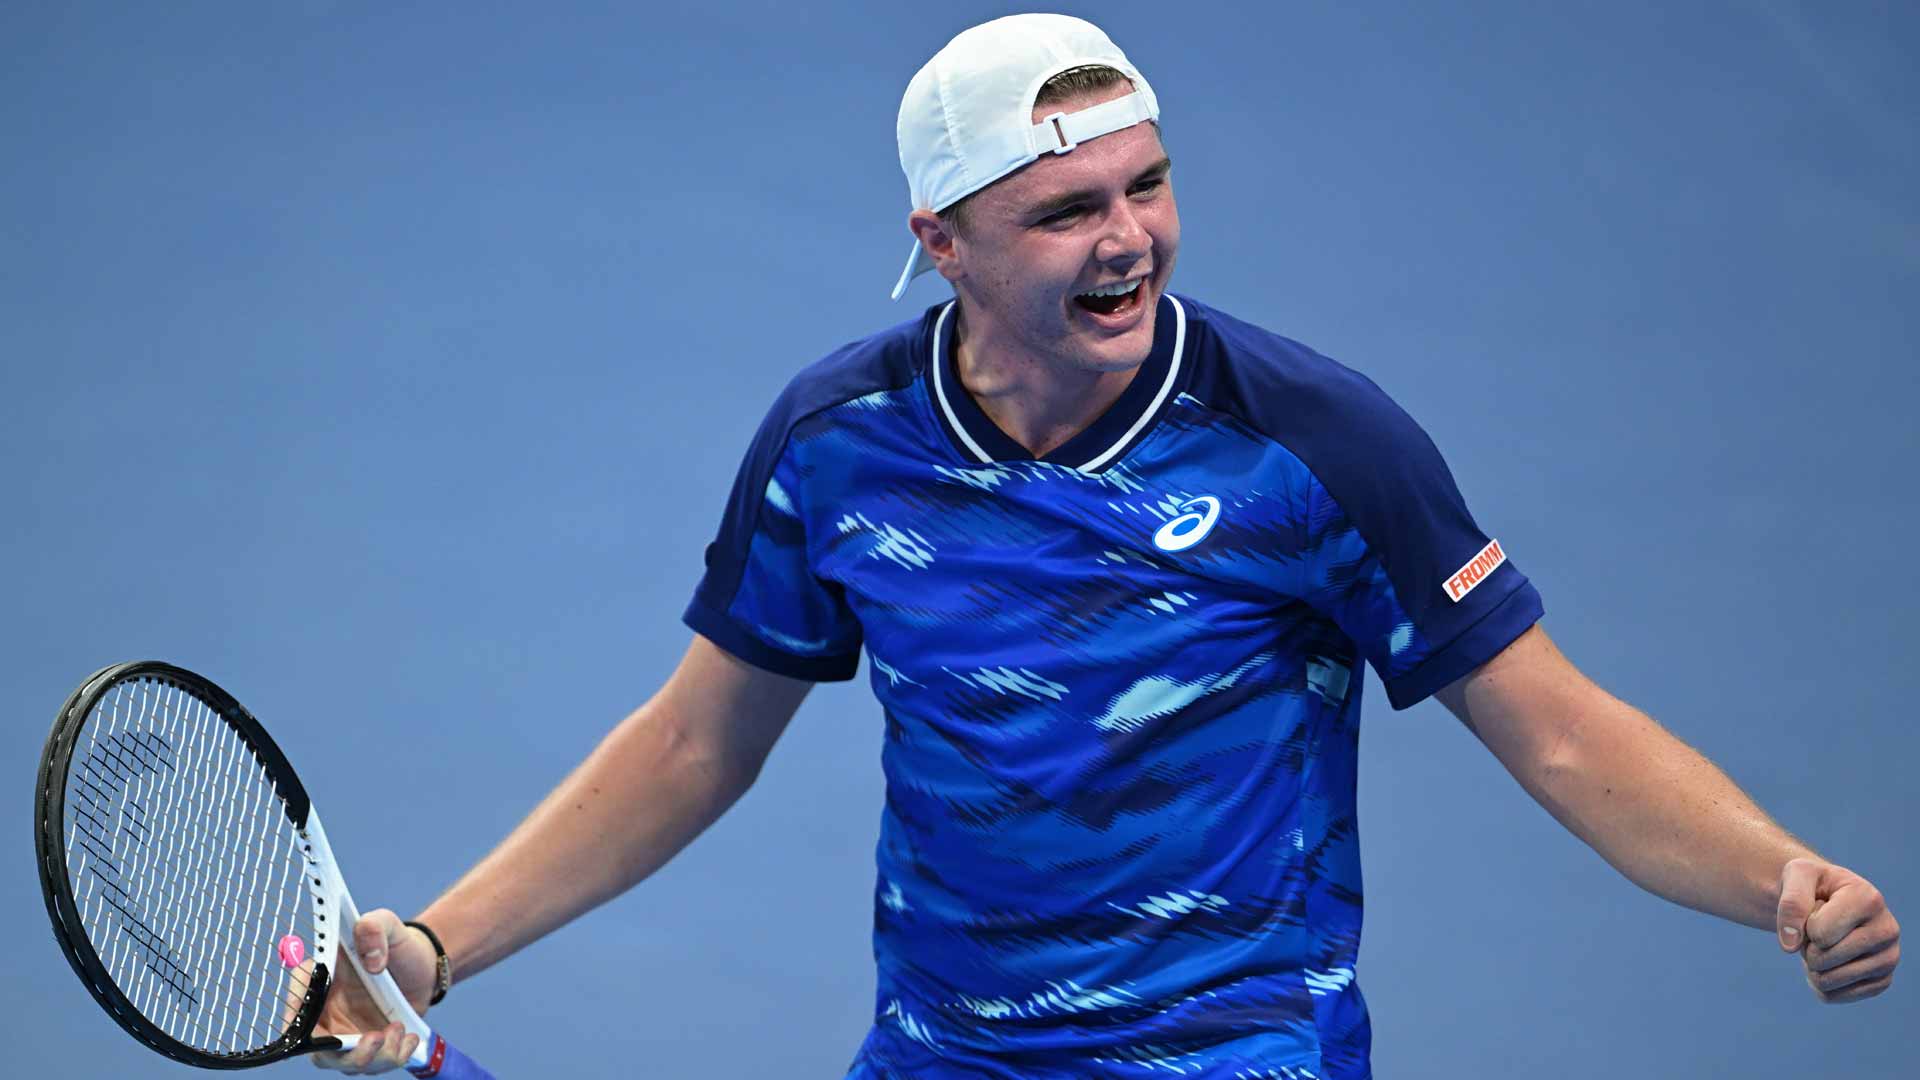 Dominic Stricker is aiming to make his US Open main draw debut.